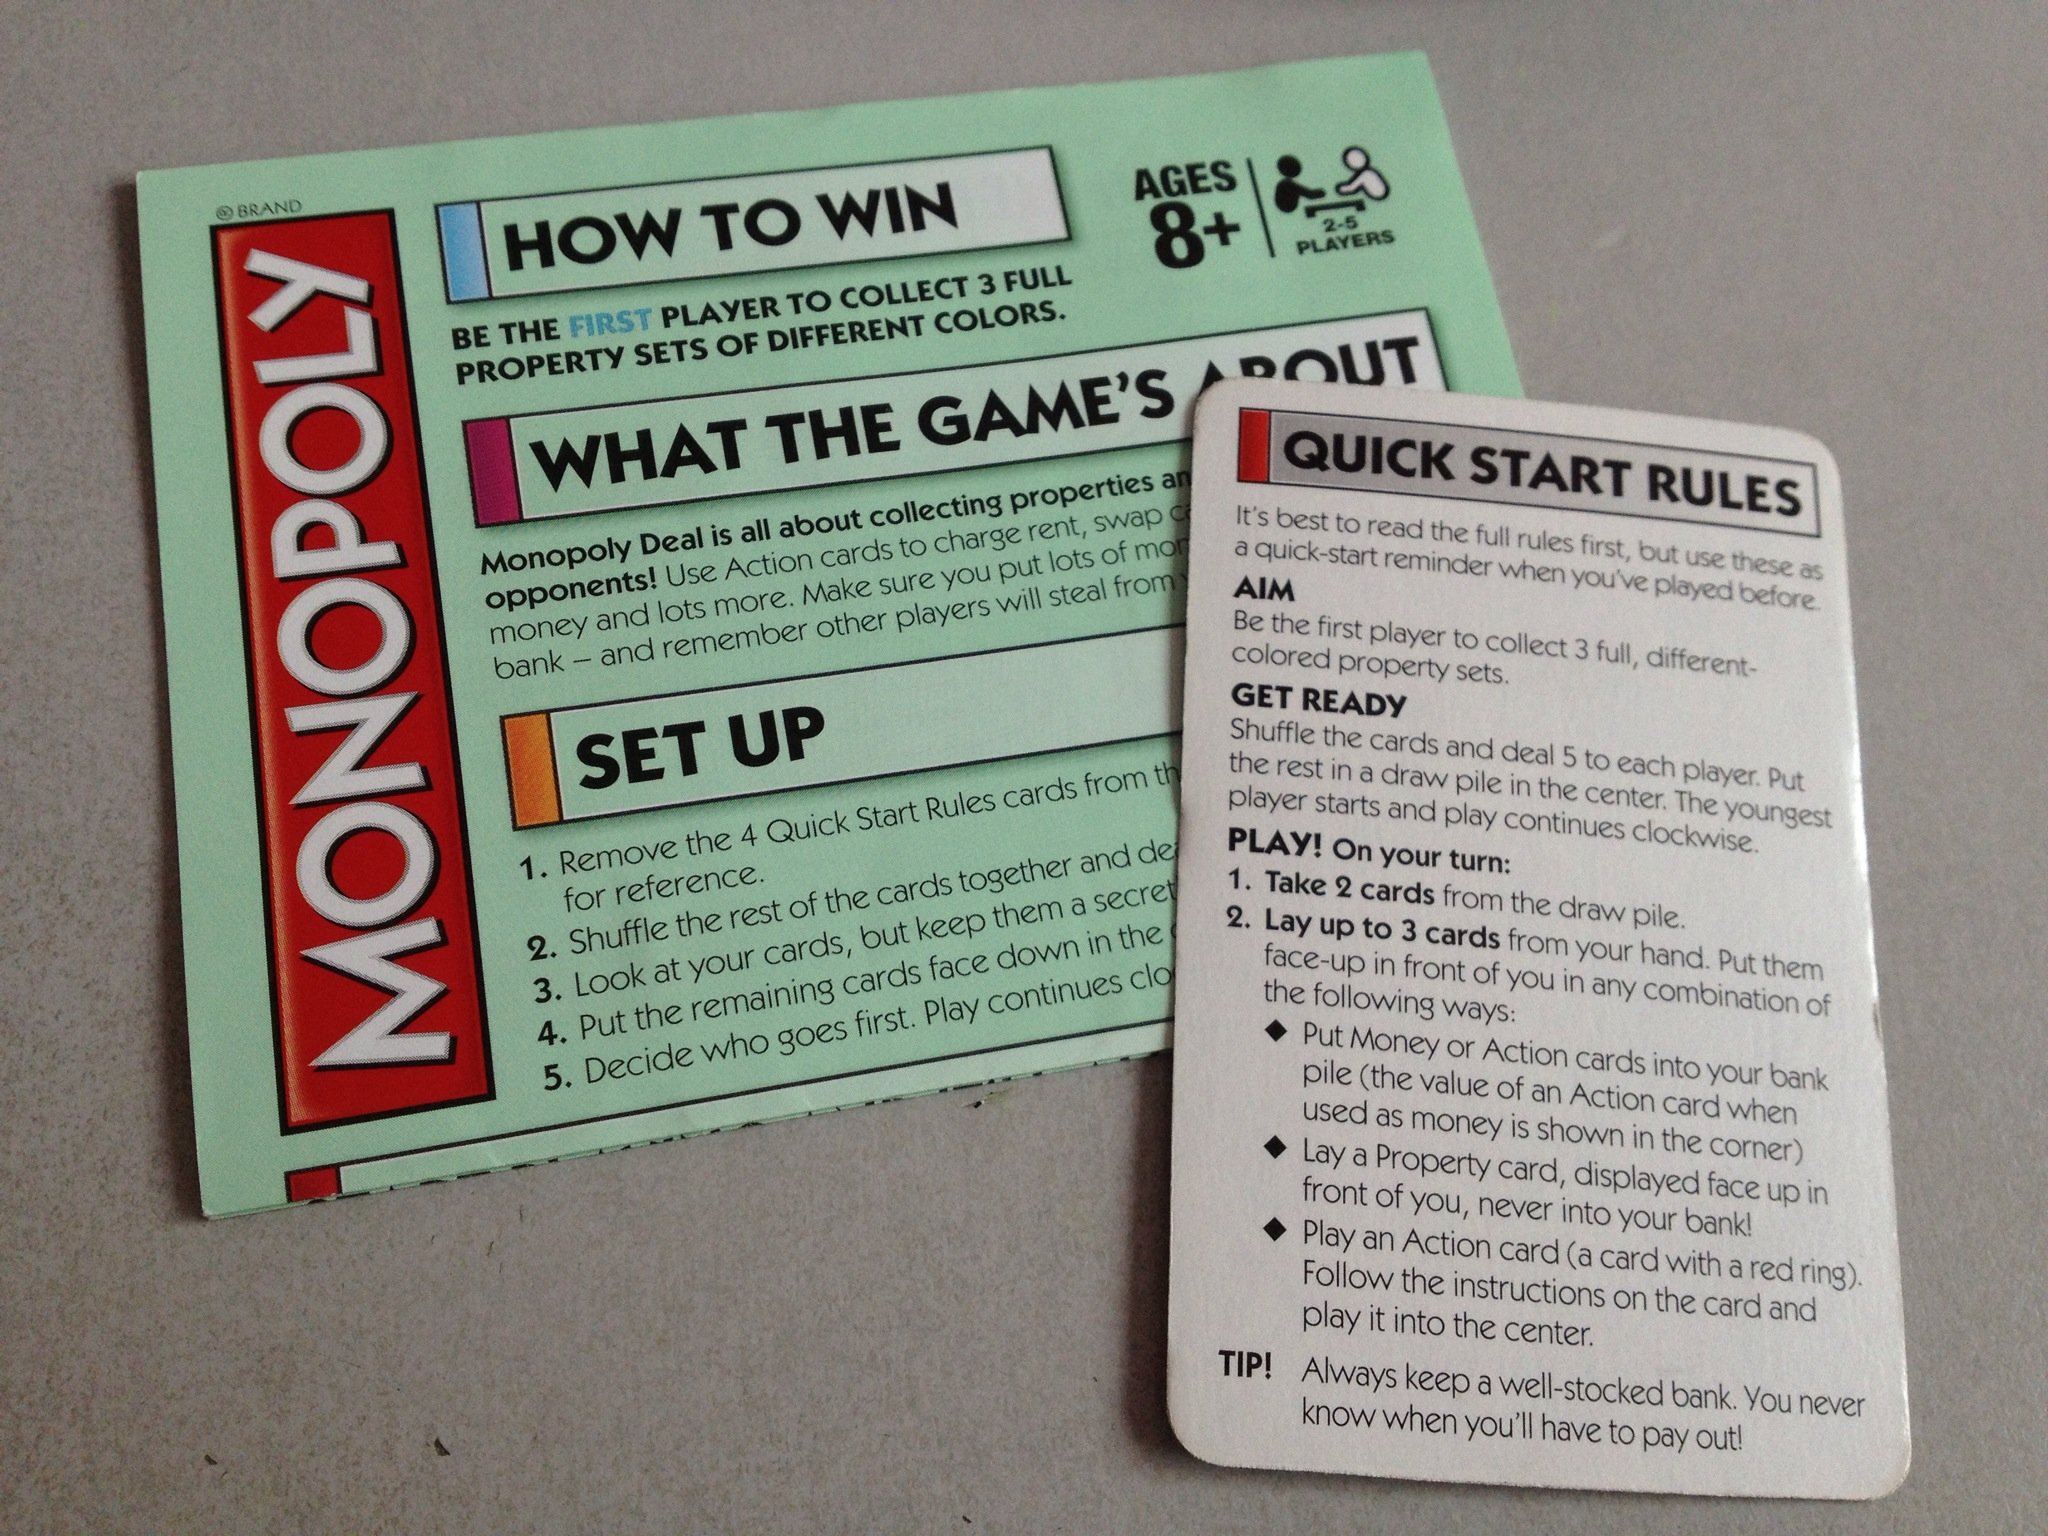 monopoly gamer edition rules